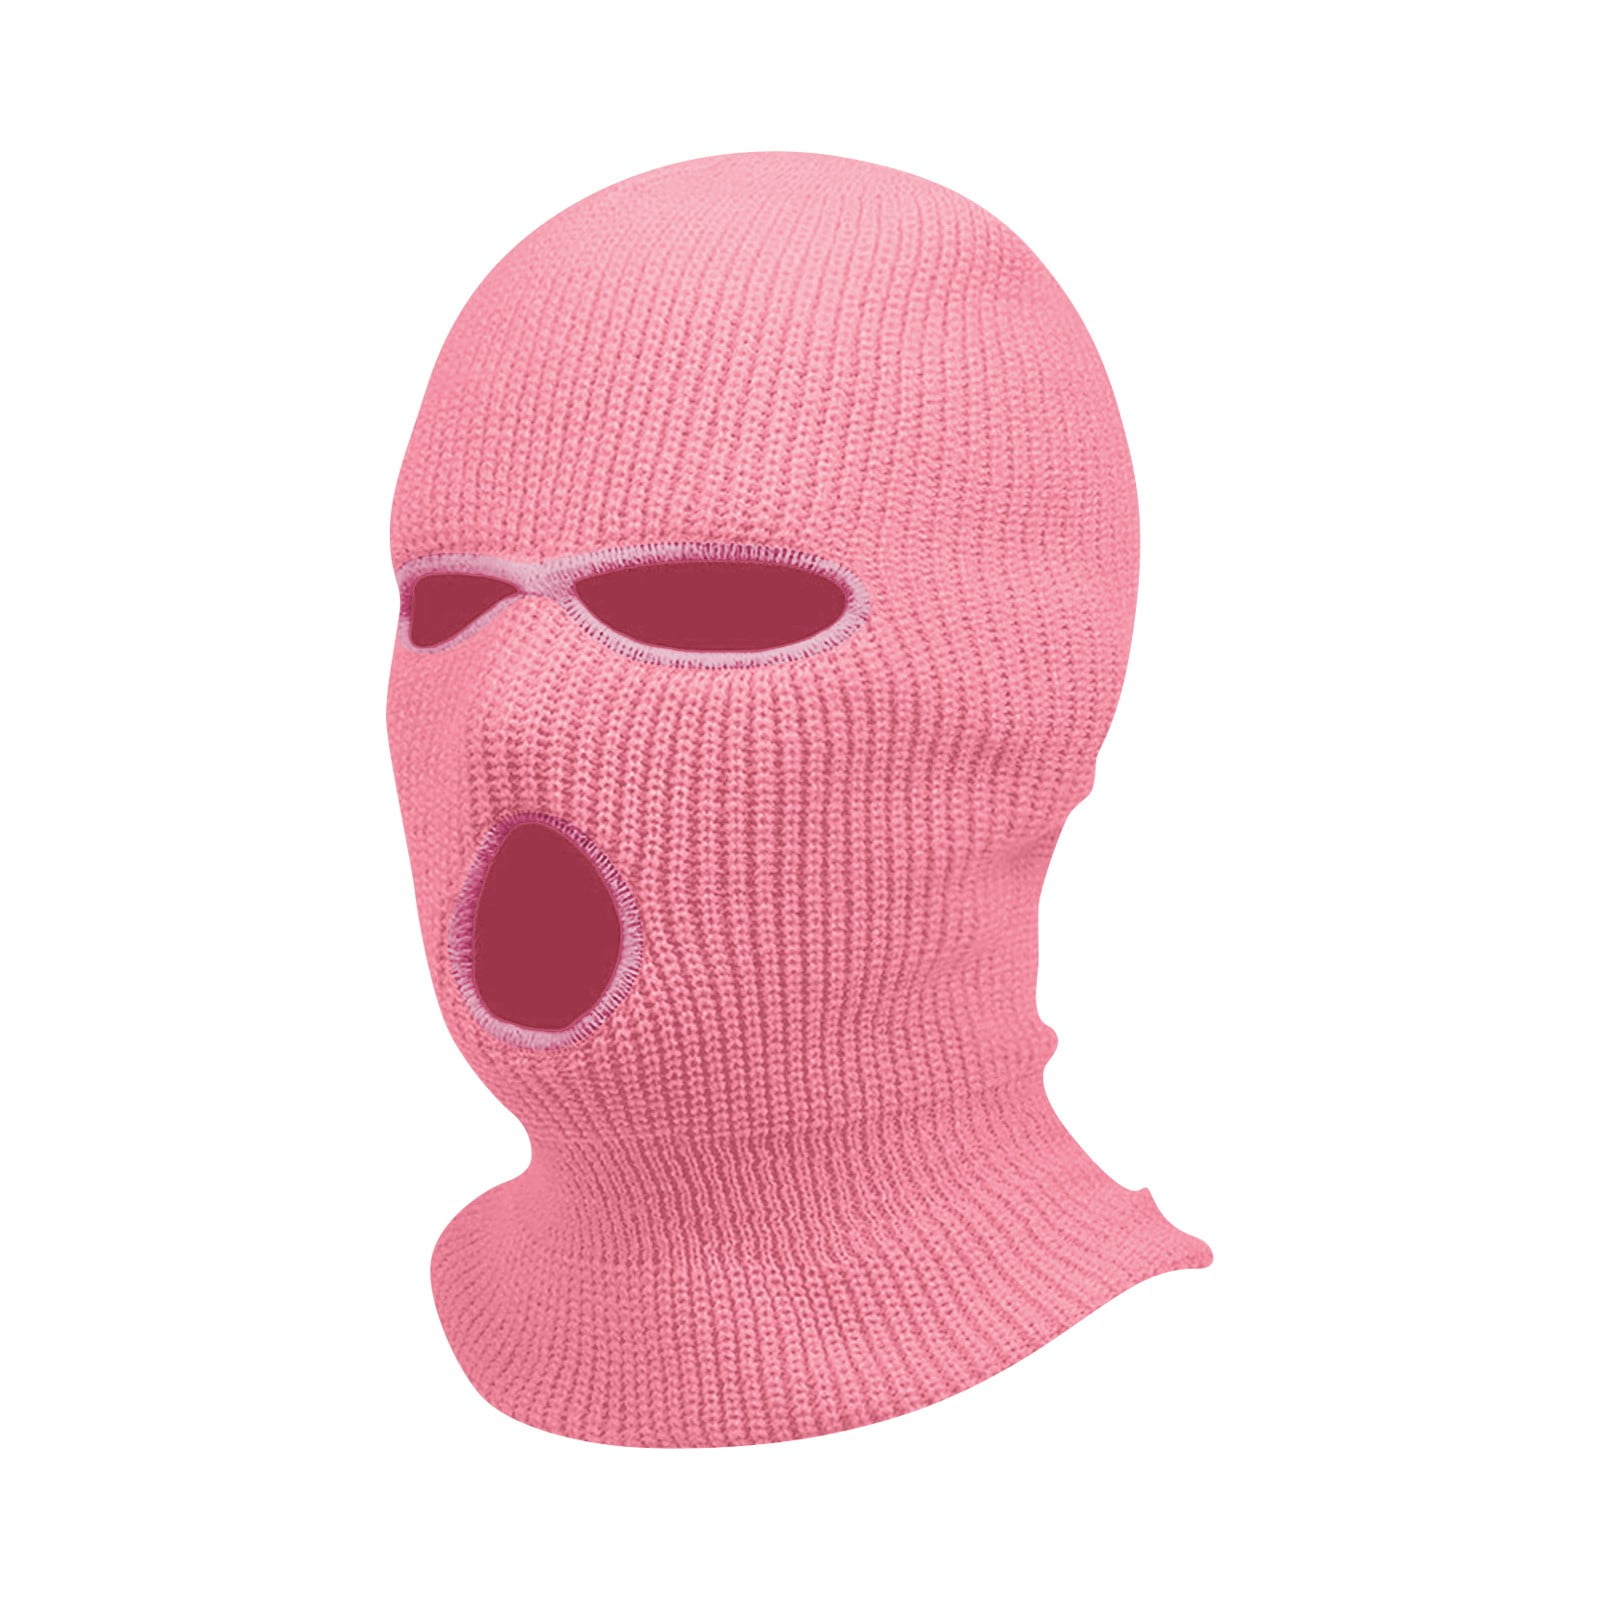 Mlqidk 3 Hole Winter Knitted Mask, Outdoor Sports Full Face Cover Ski ...